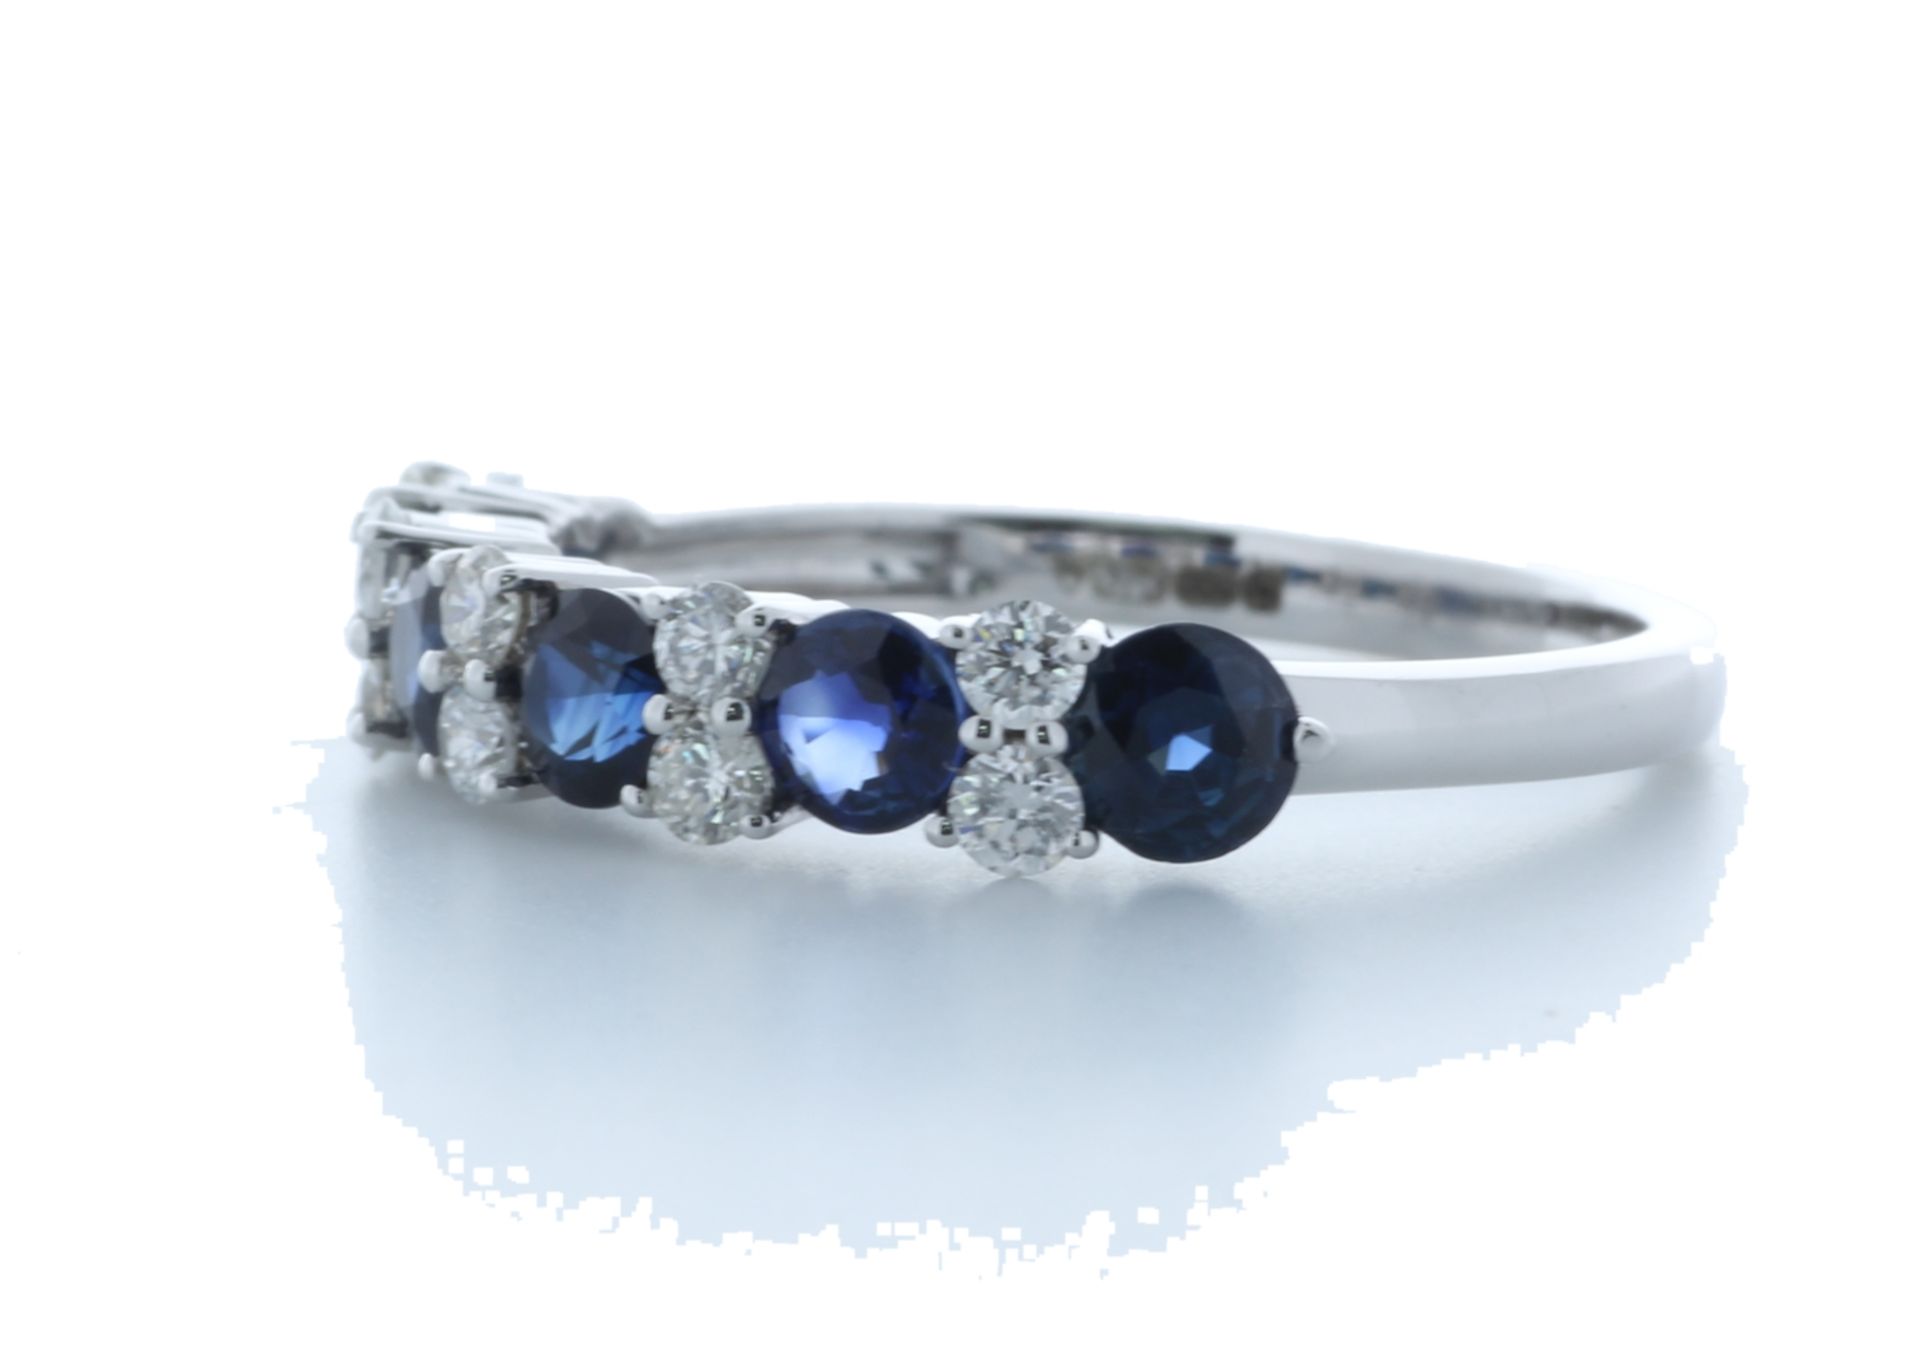 9ct White Gold Claw Set Semi Eternity Diamond And Sapphire Ring Carats - Valued by AGI £1,152.00 - - Image 2 of 4